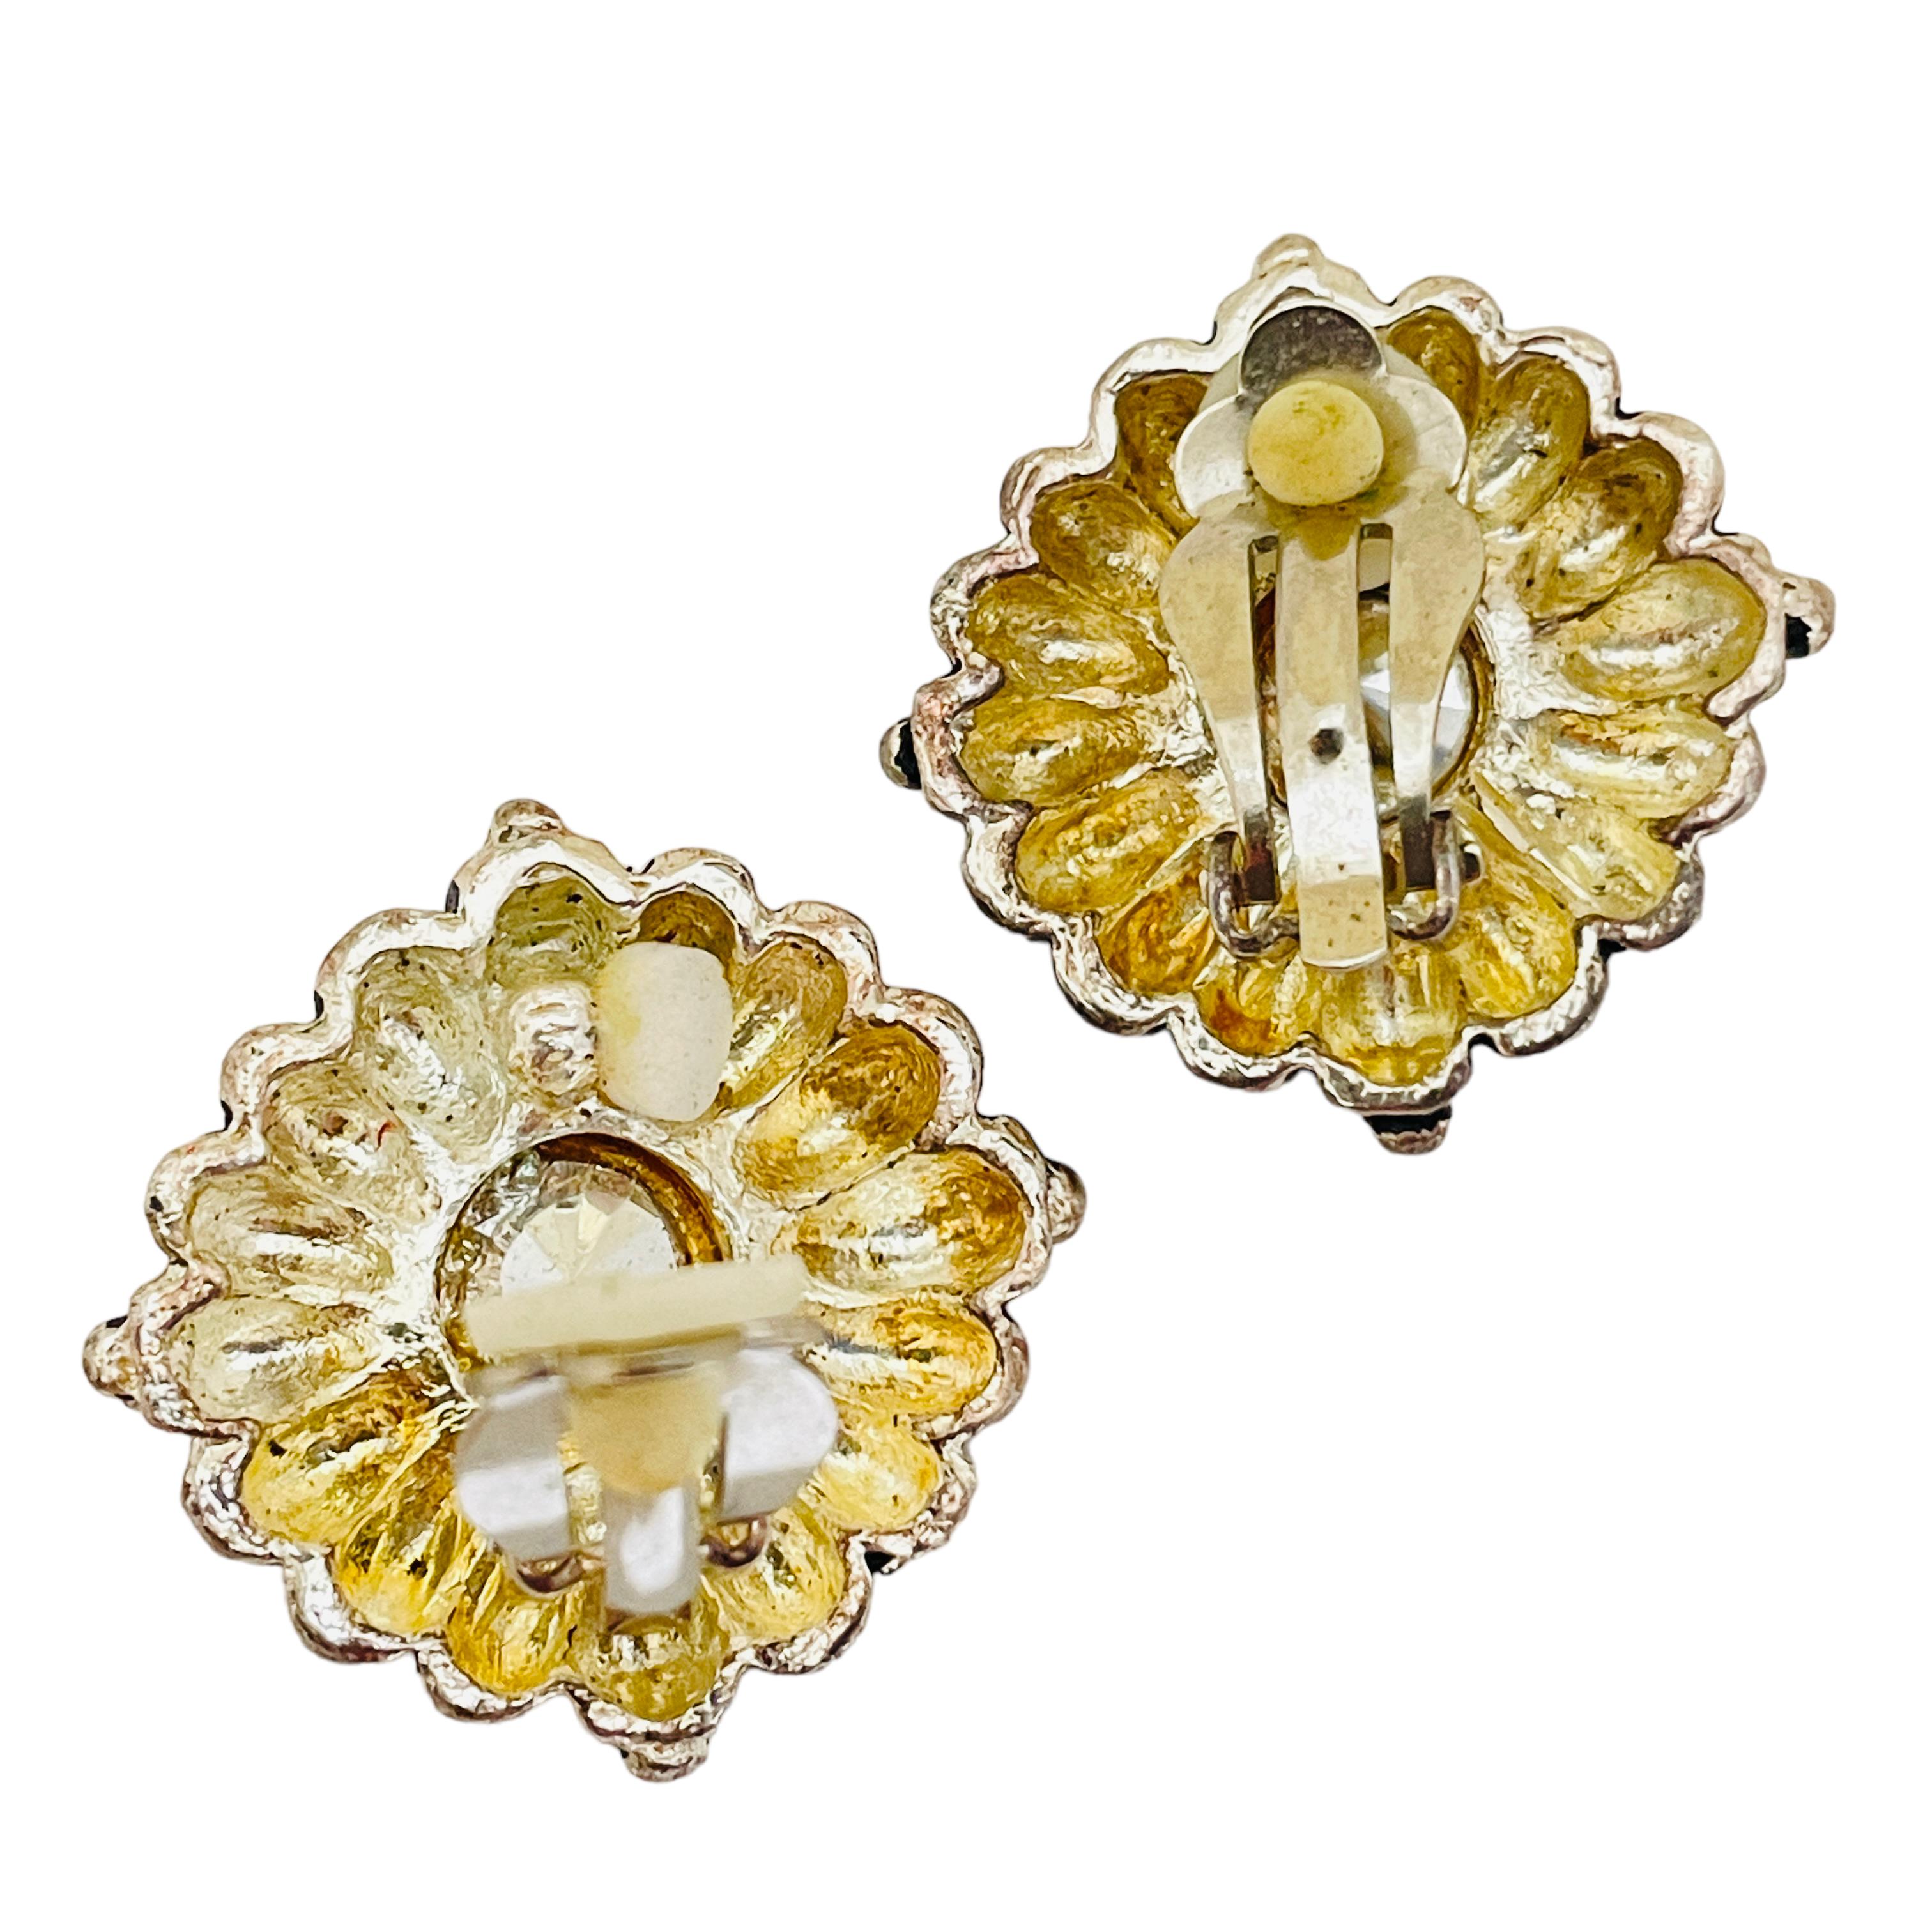 Vintage silver tone glass designer runway clip on earrings   In Excellent Condition For Sale In Palos Hills, IL